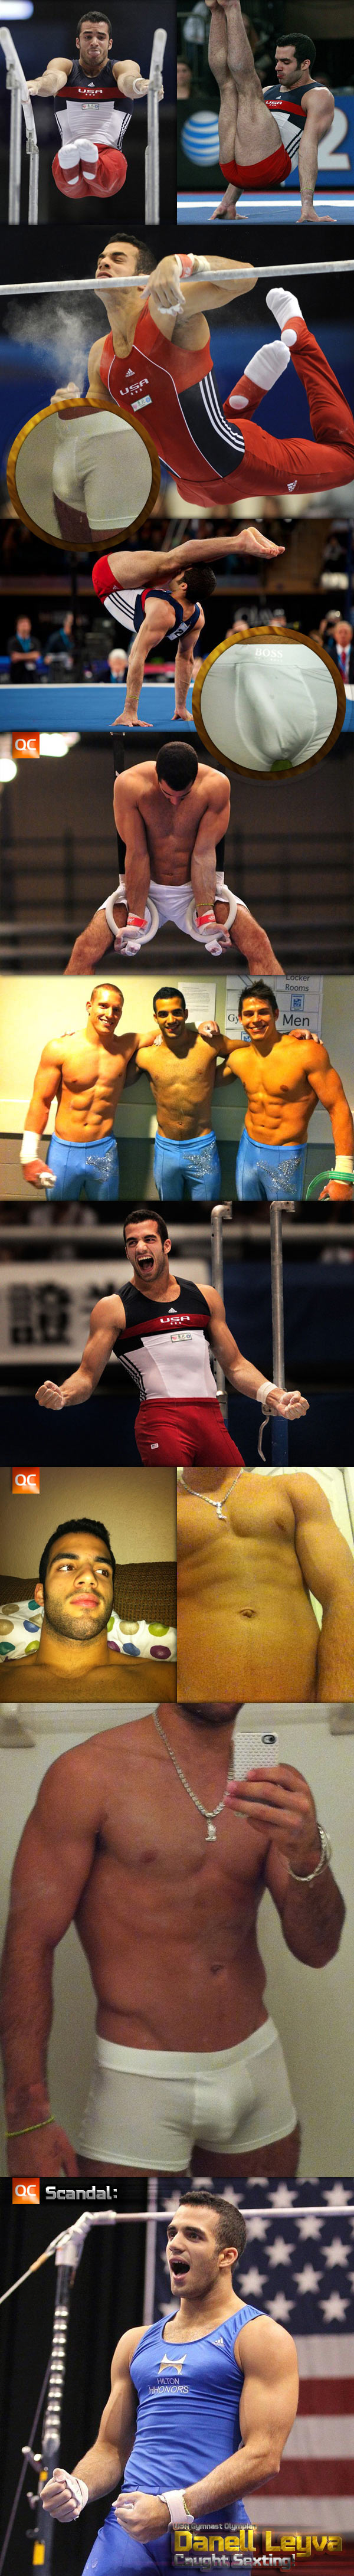 scandal-usa_gymnast_olympian_danell_leyva_sexting-collage_updt02